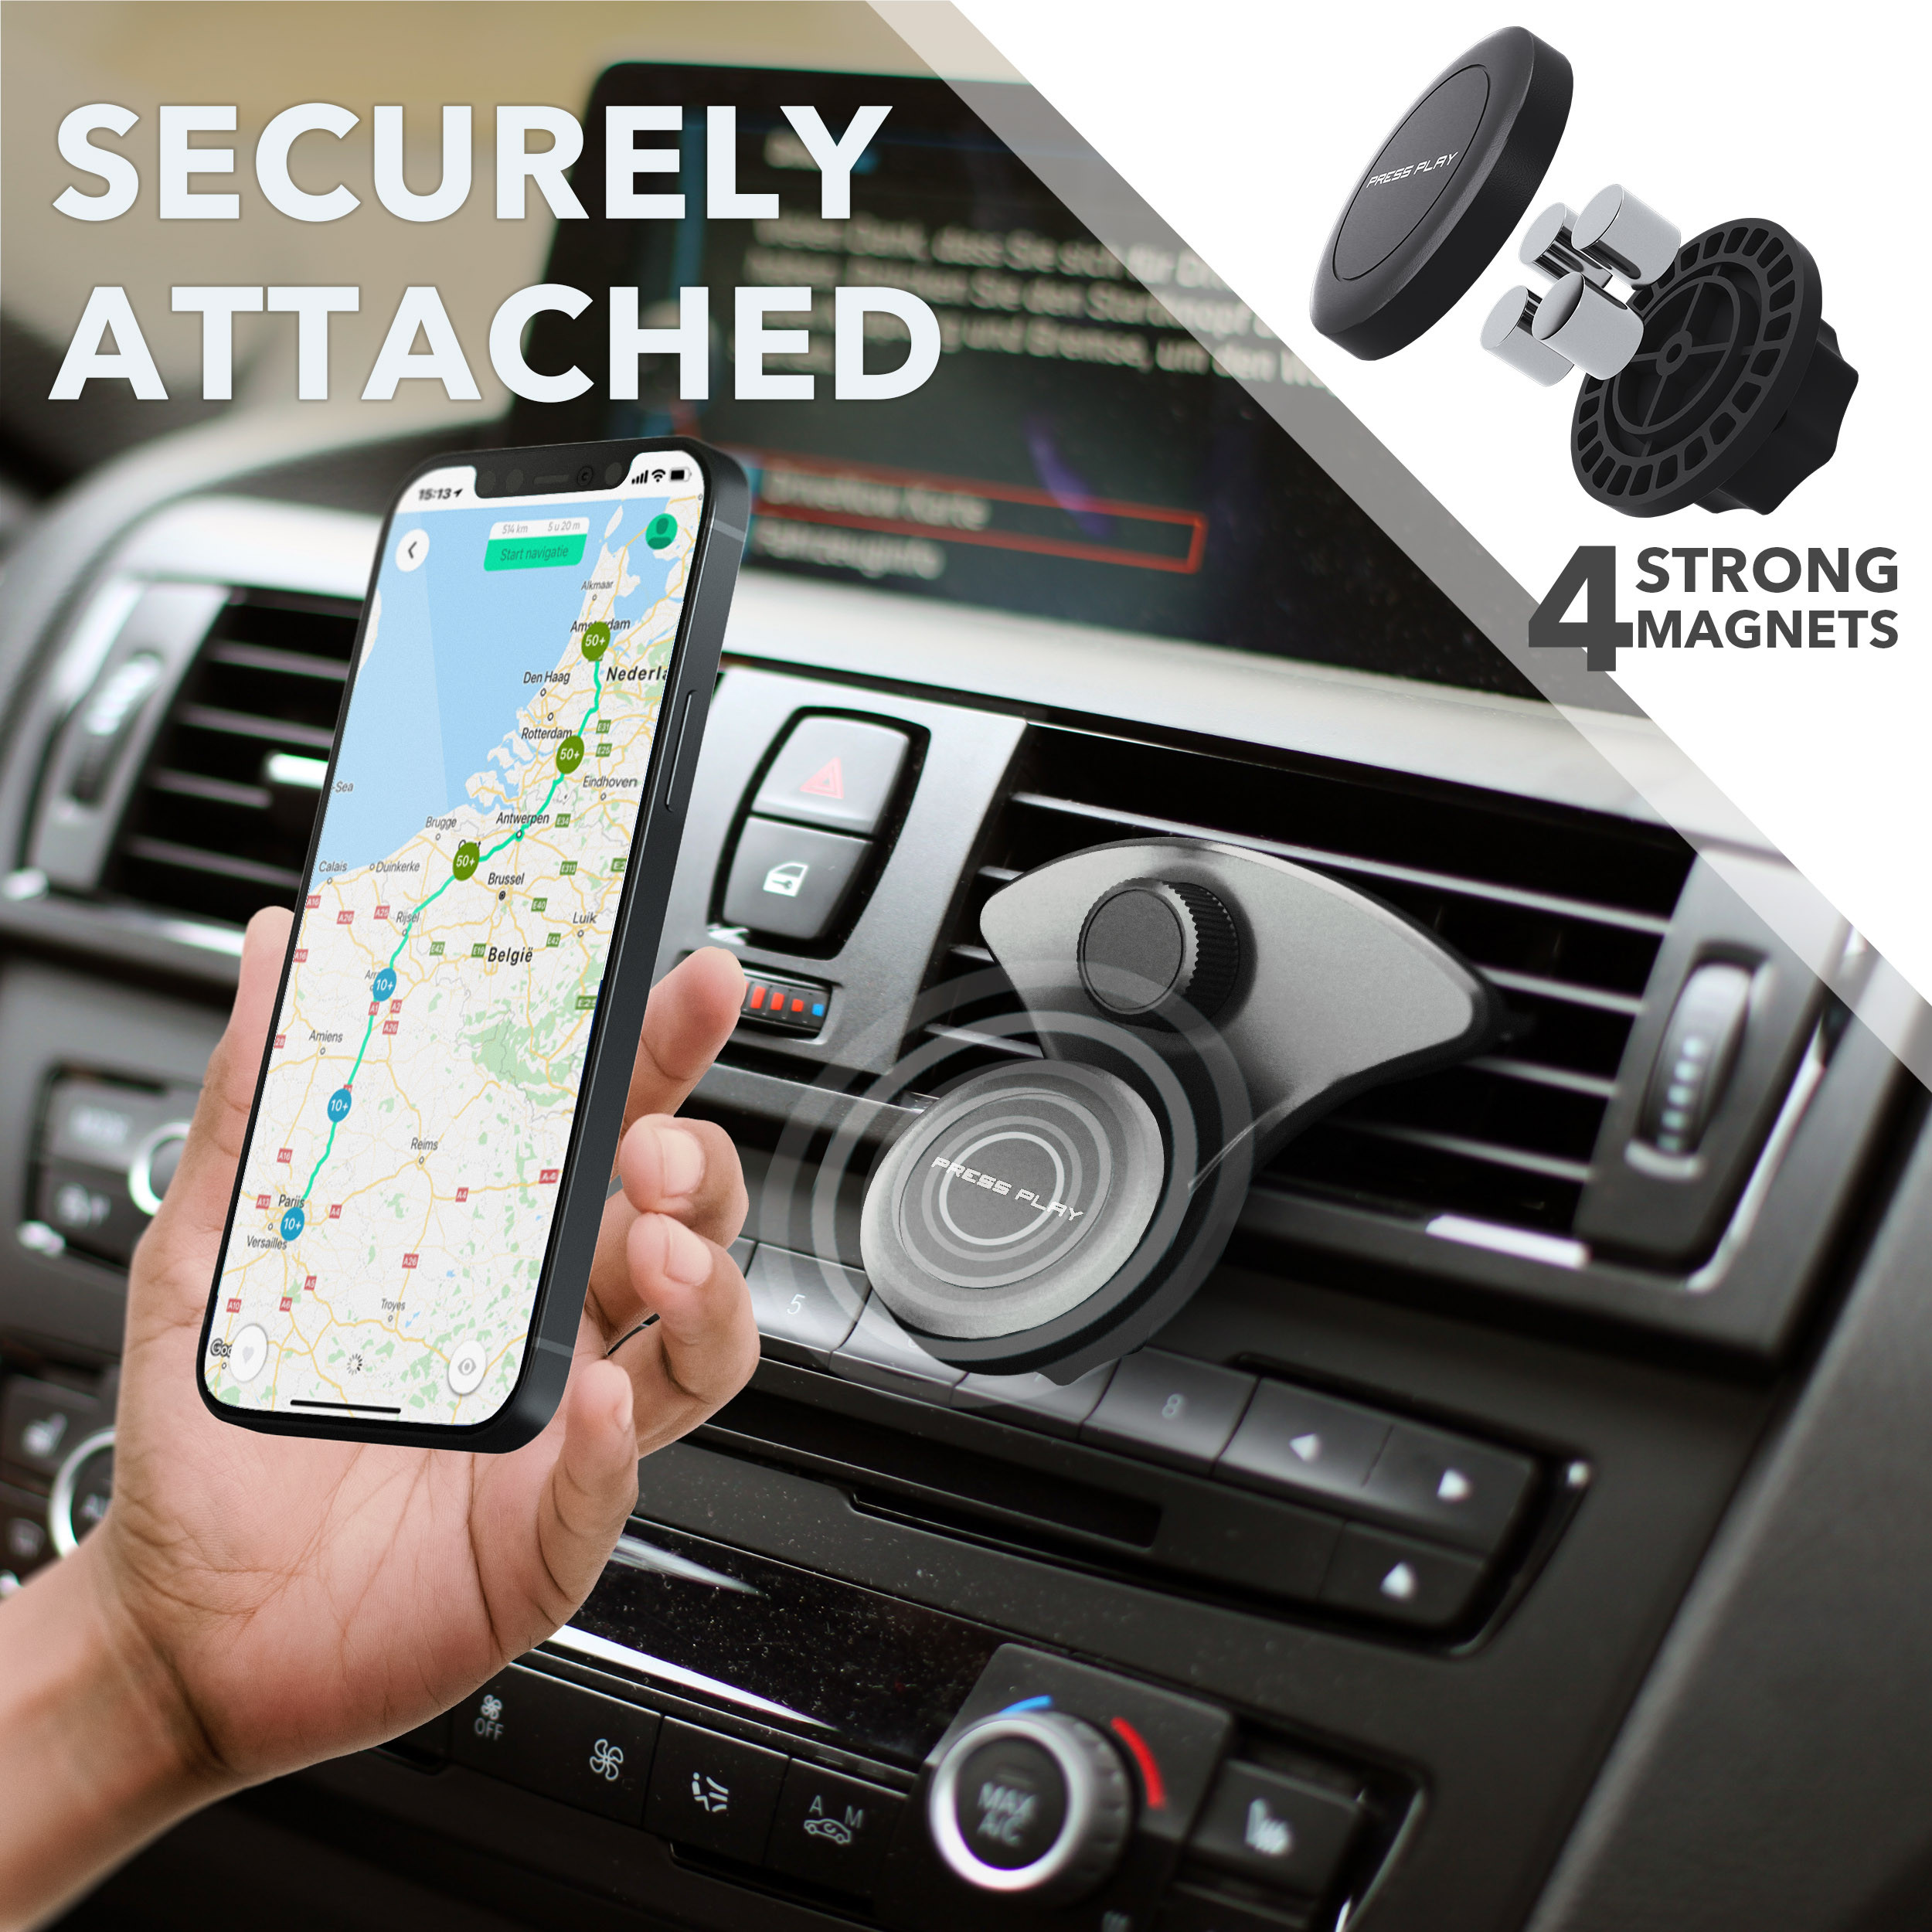 Phone mount using strong magnet system.
The mount slides easily onto horizontal and vertical slats and have a clamp grips for a secure hold. This magnetic mount never budges when pulling off the phone.